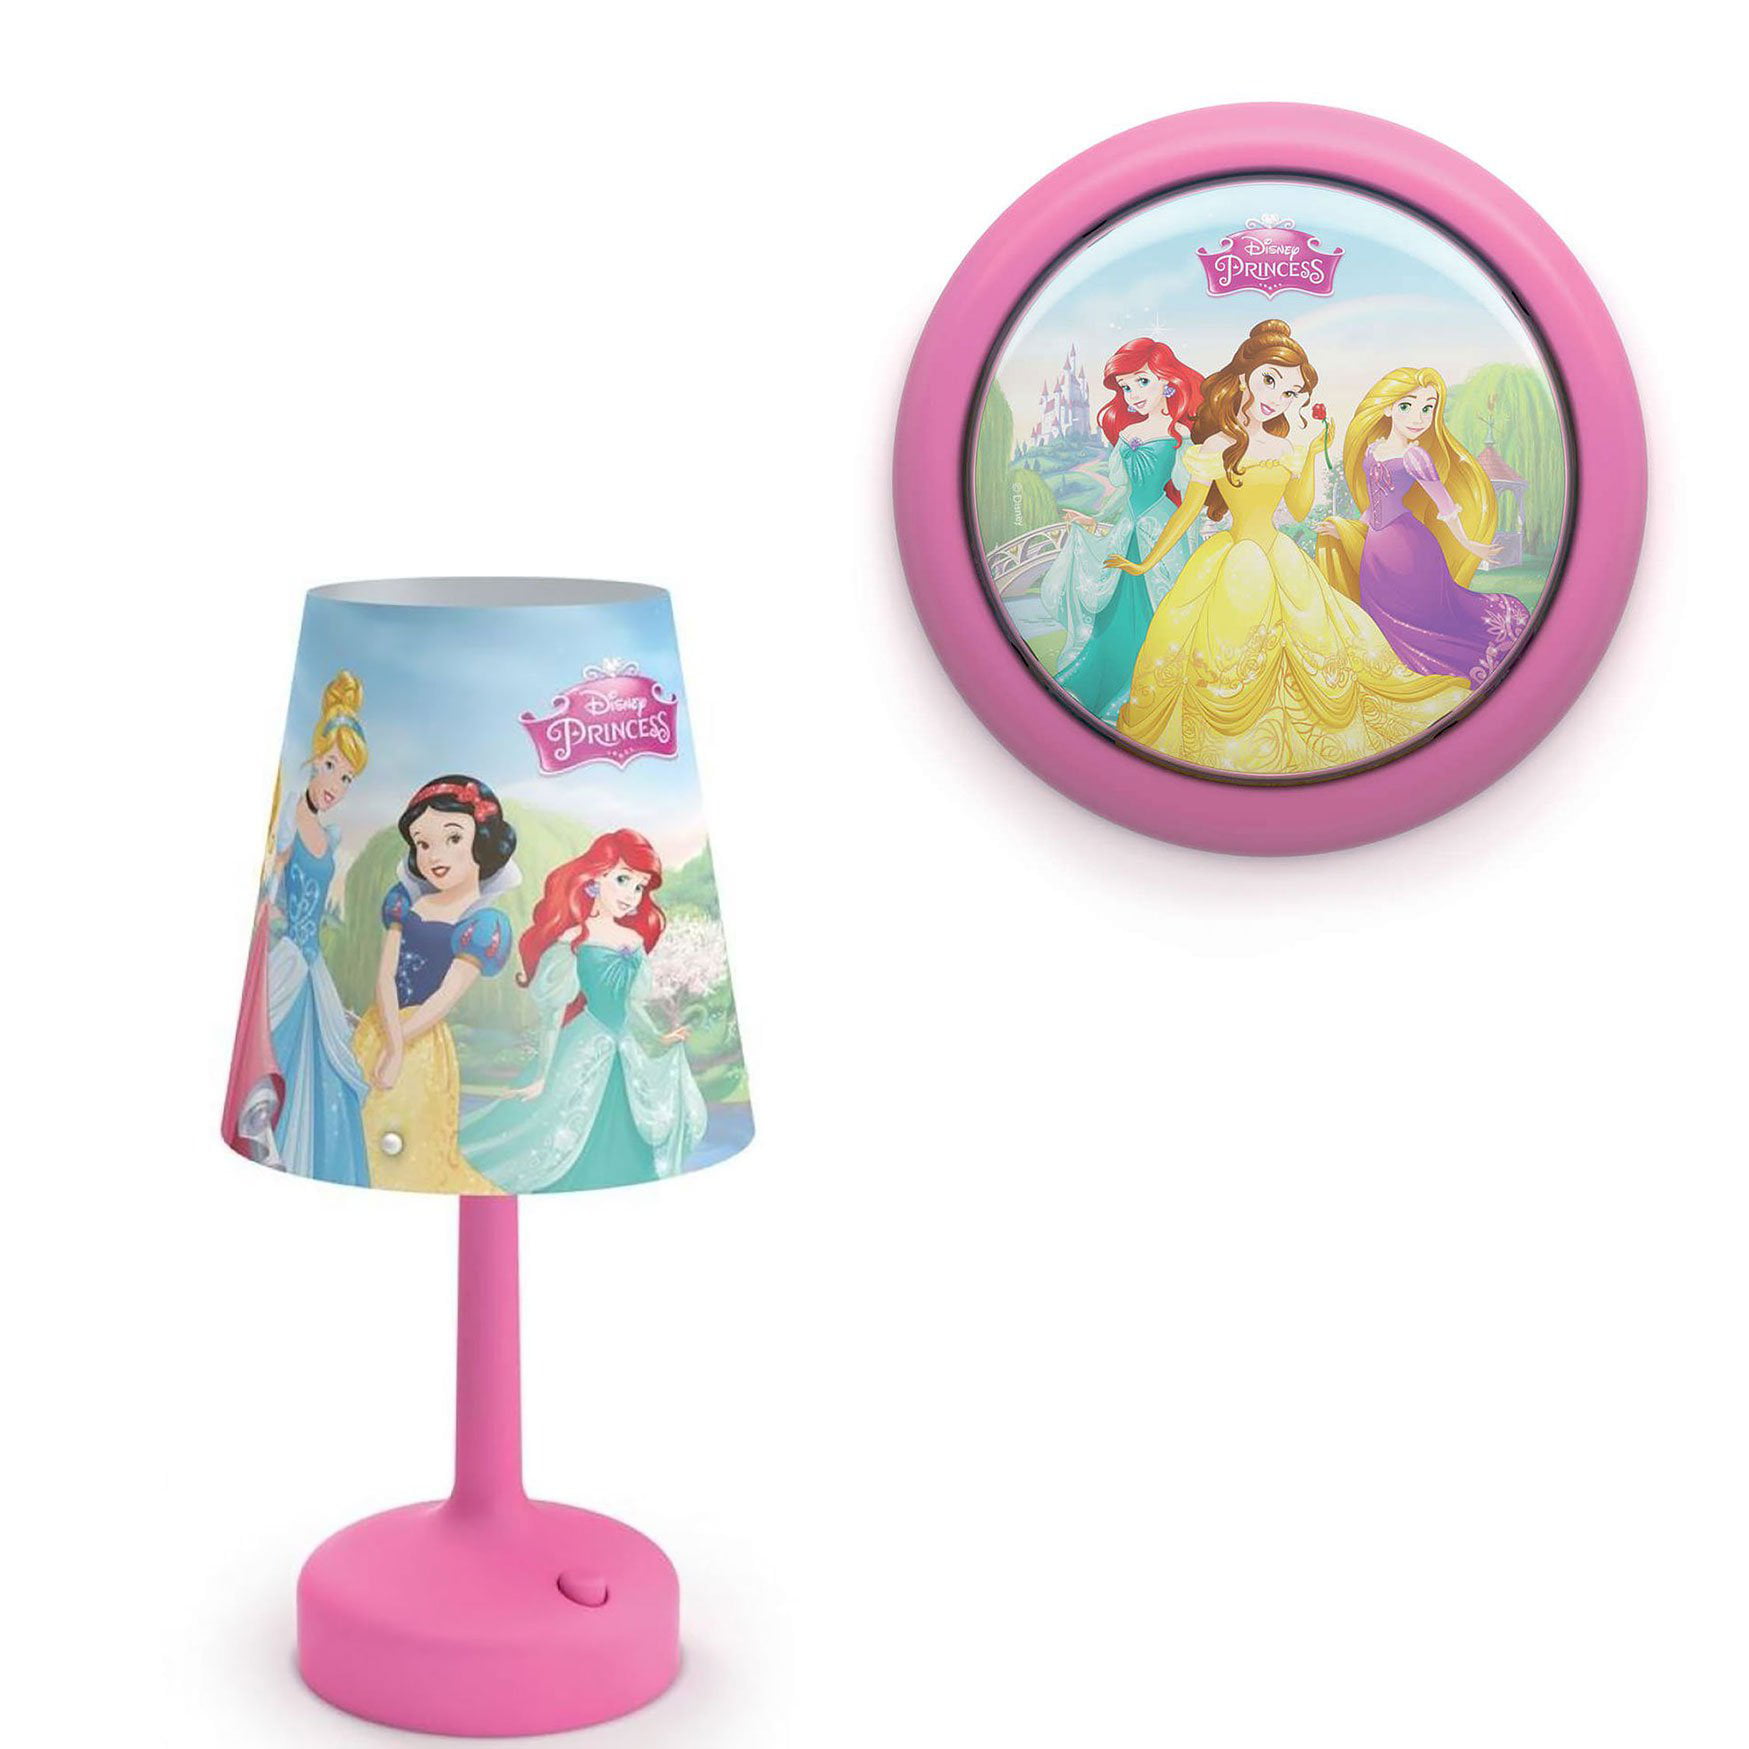 Philips Battery Operated Disney Princess Childrens Portable LED Night Light 0. 